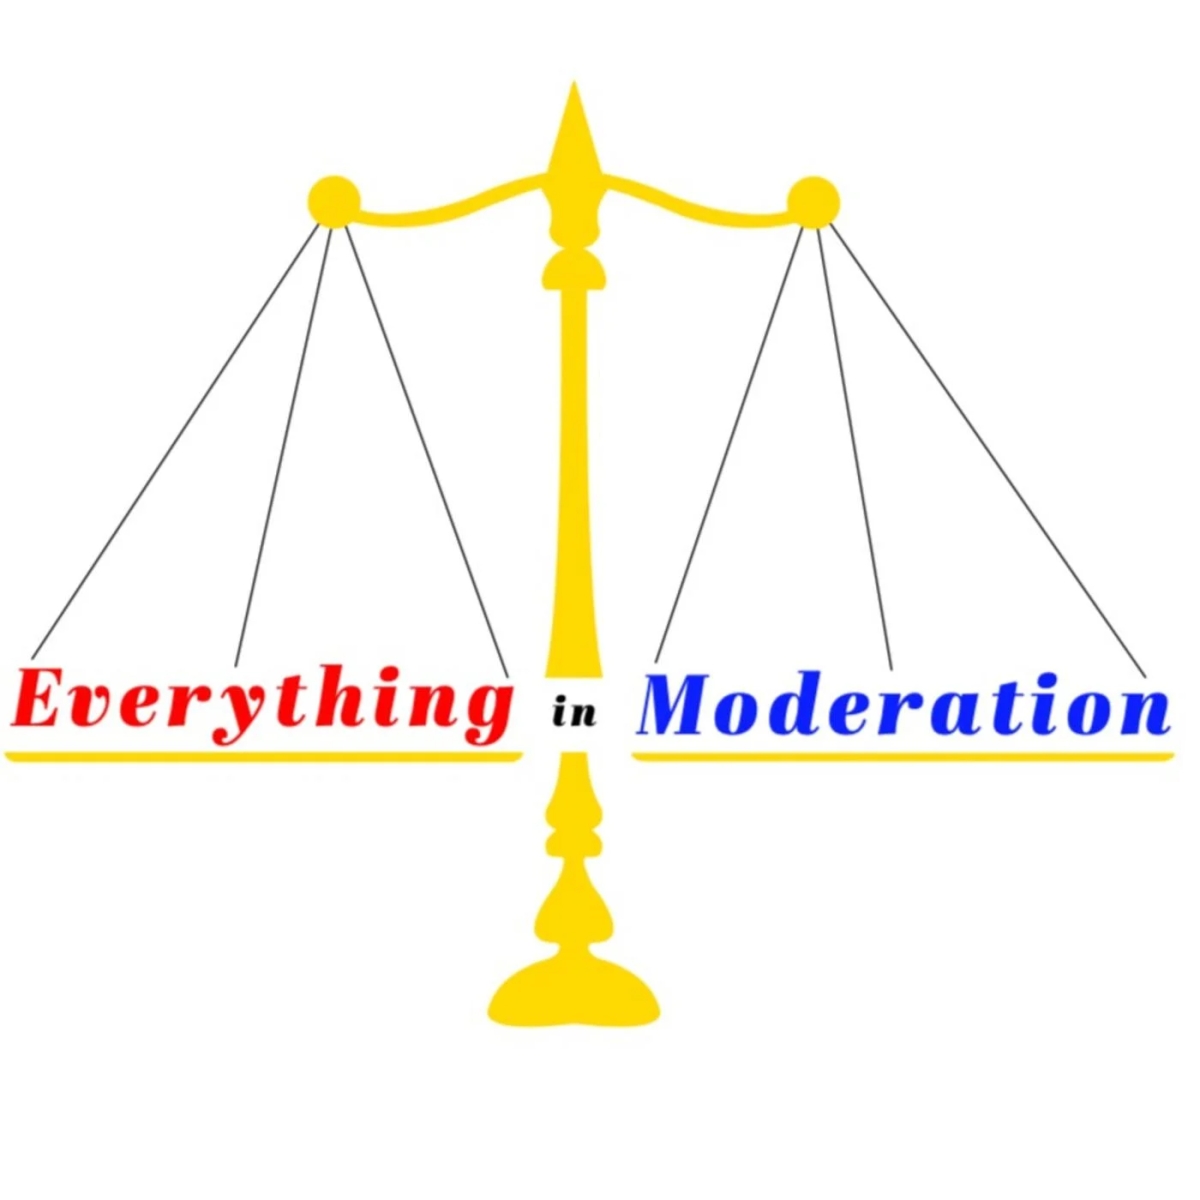 ‘Everything In Moderation’